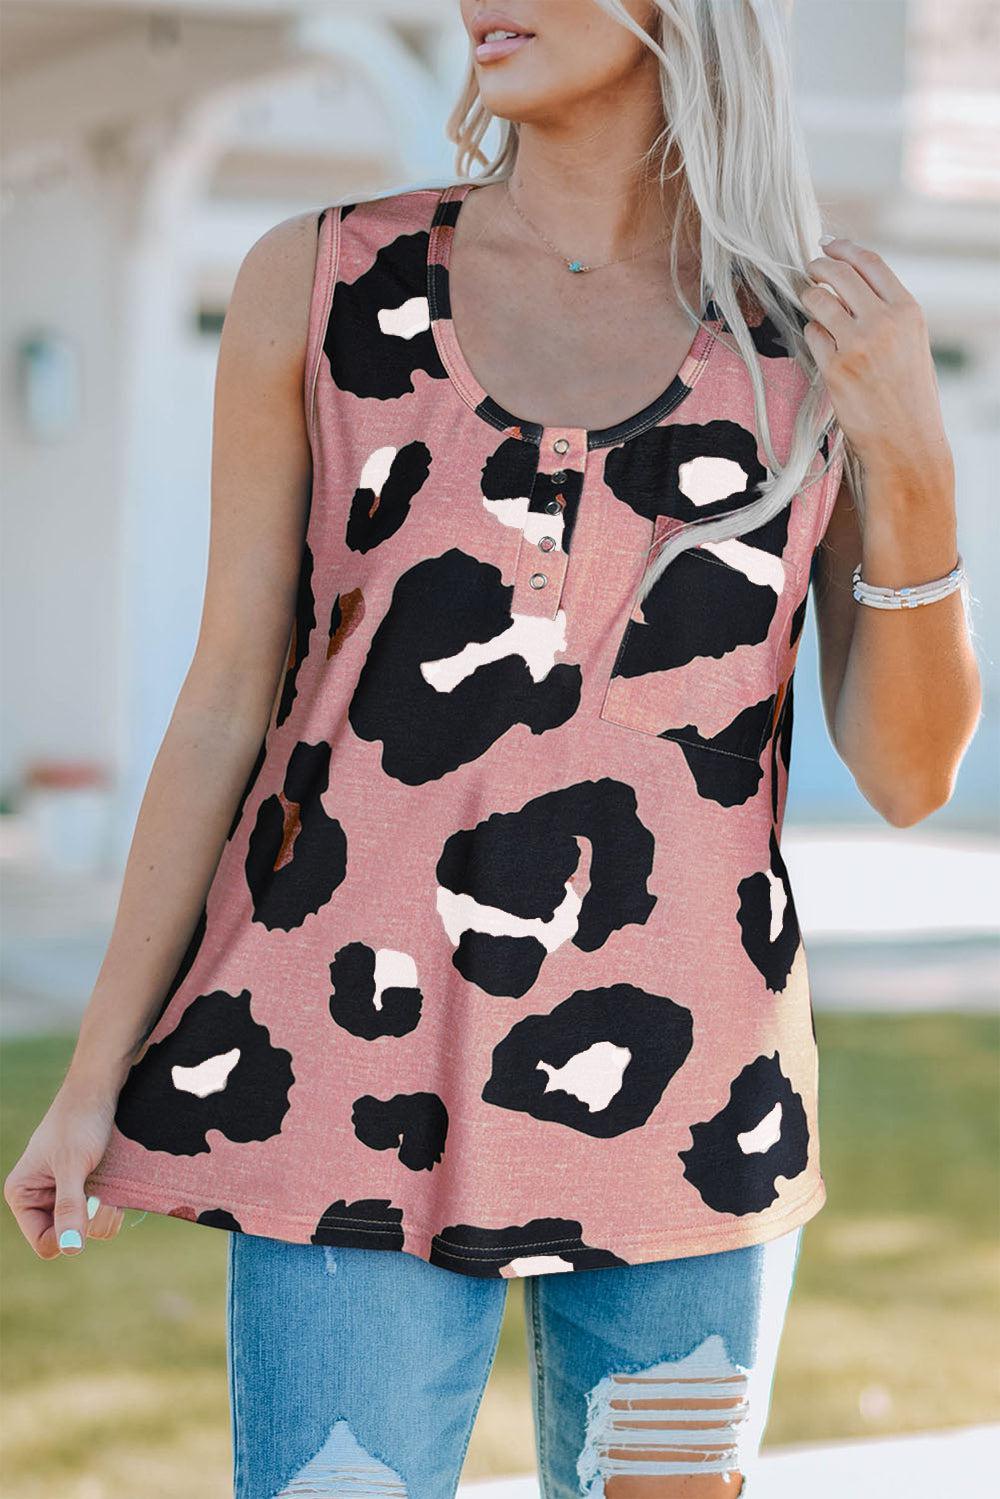 a woman wearing a pink top with black and white animal print